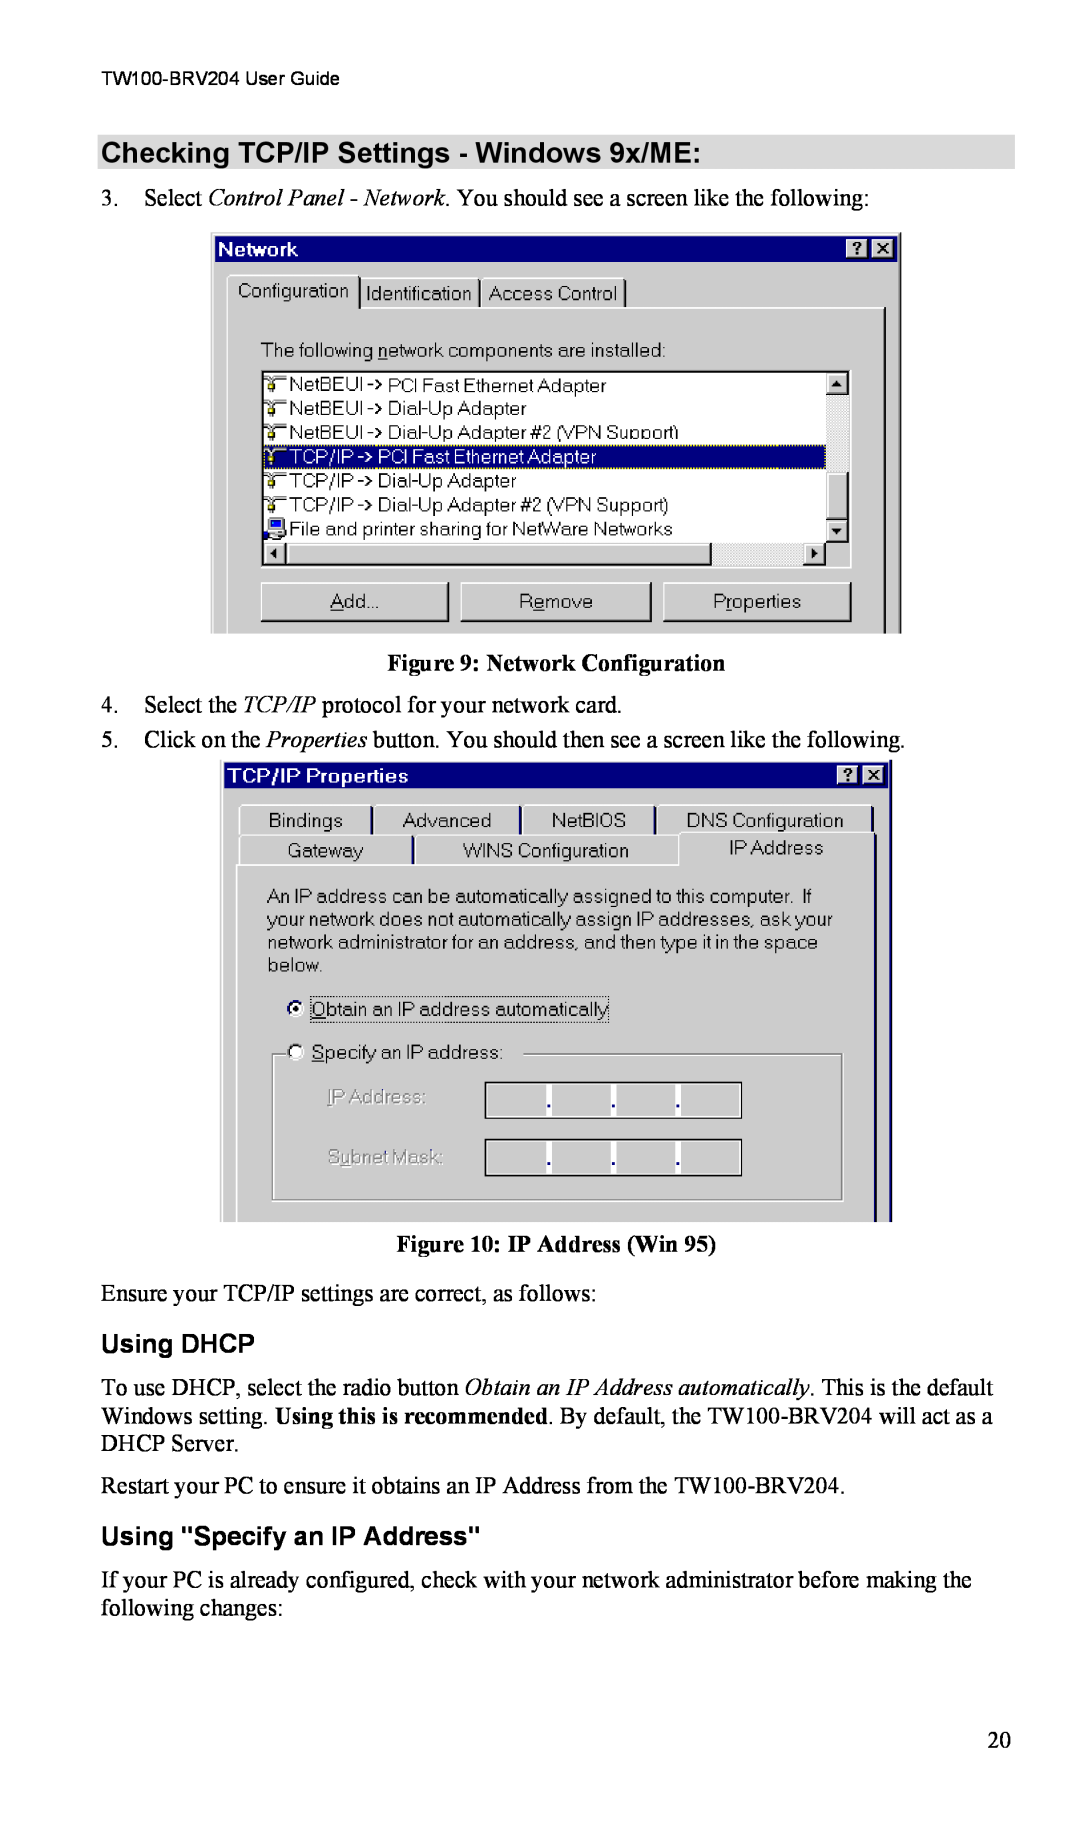 TRENDnet VPN Firewall Router manual Checking TCP/IP Settings - Windows 9x/ME, Using DHCP, Using Specify an IP Address 